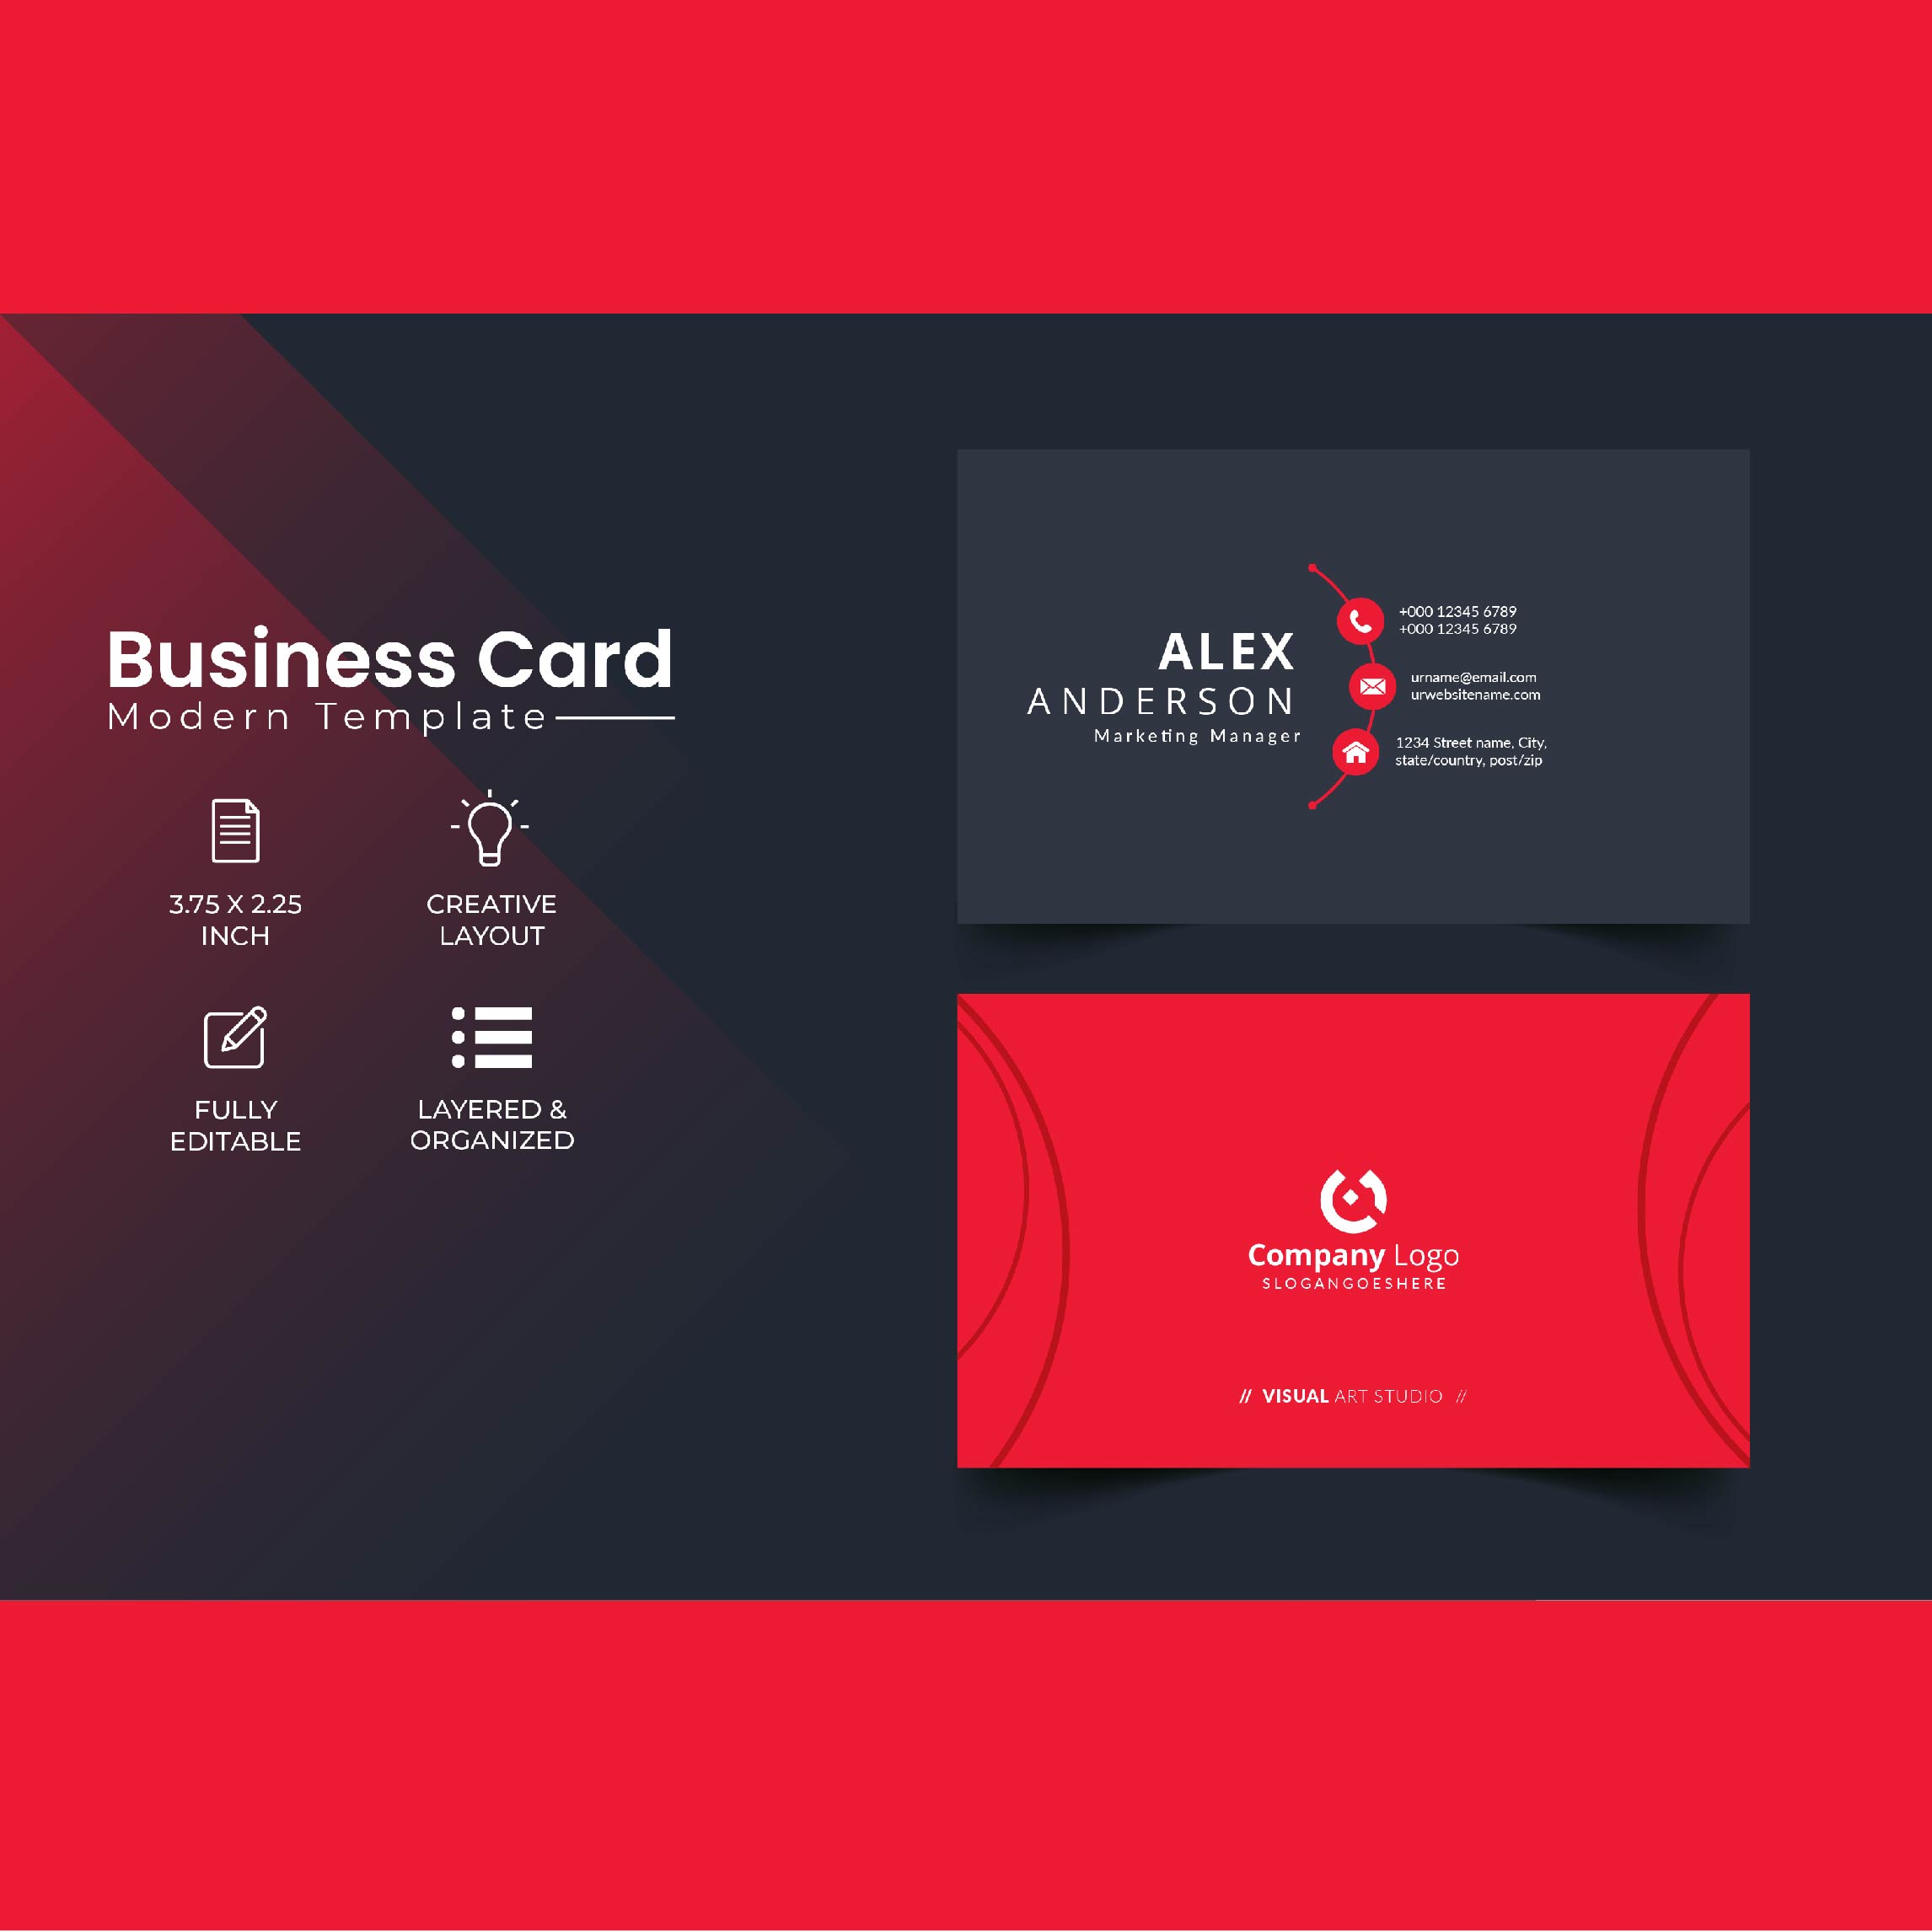 Business Cards Mockups previews.